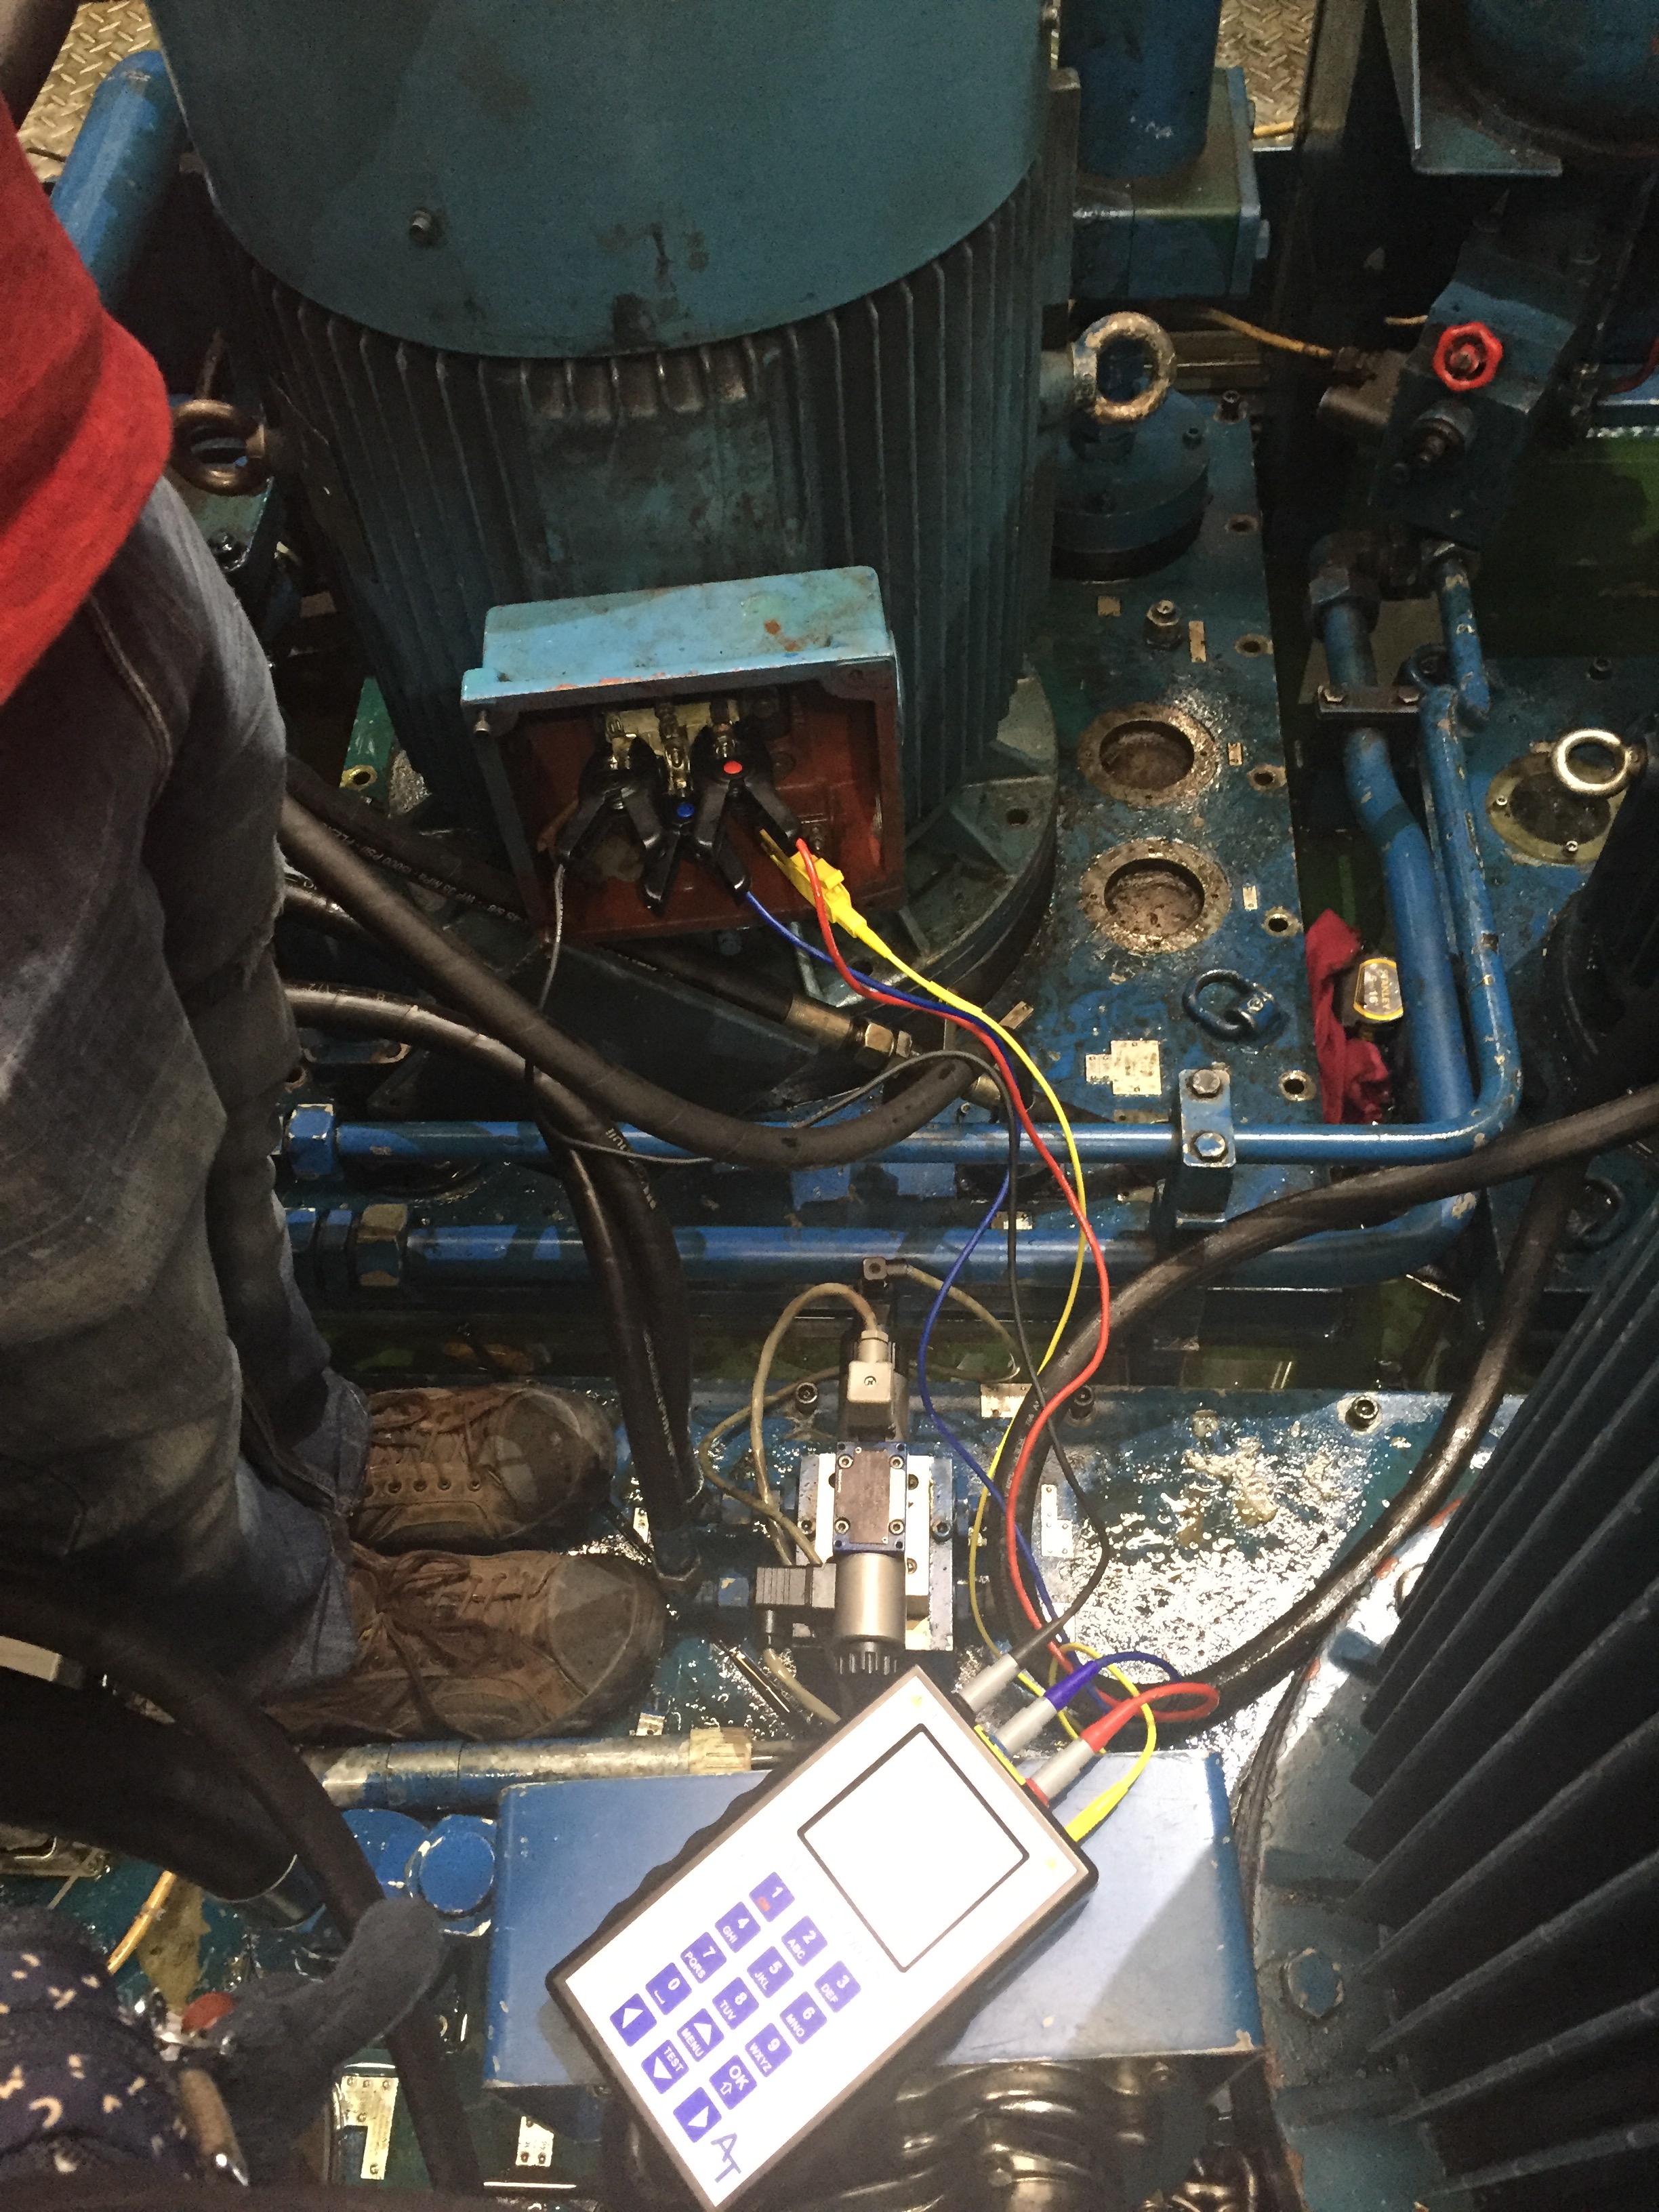 Electrical reliability test to a critical motor after failure was reported showing motor to be in good conditions.